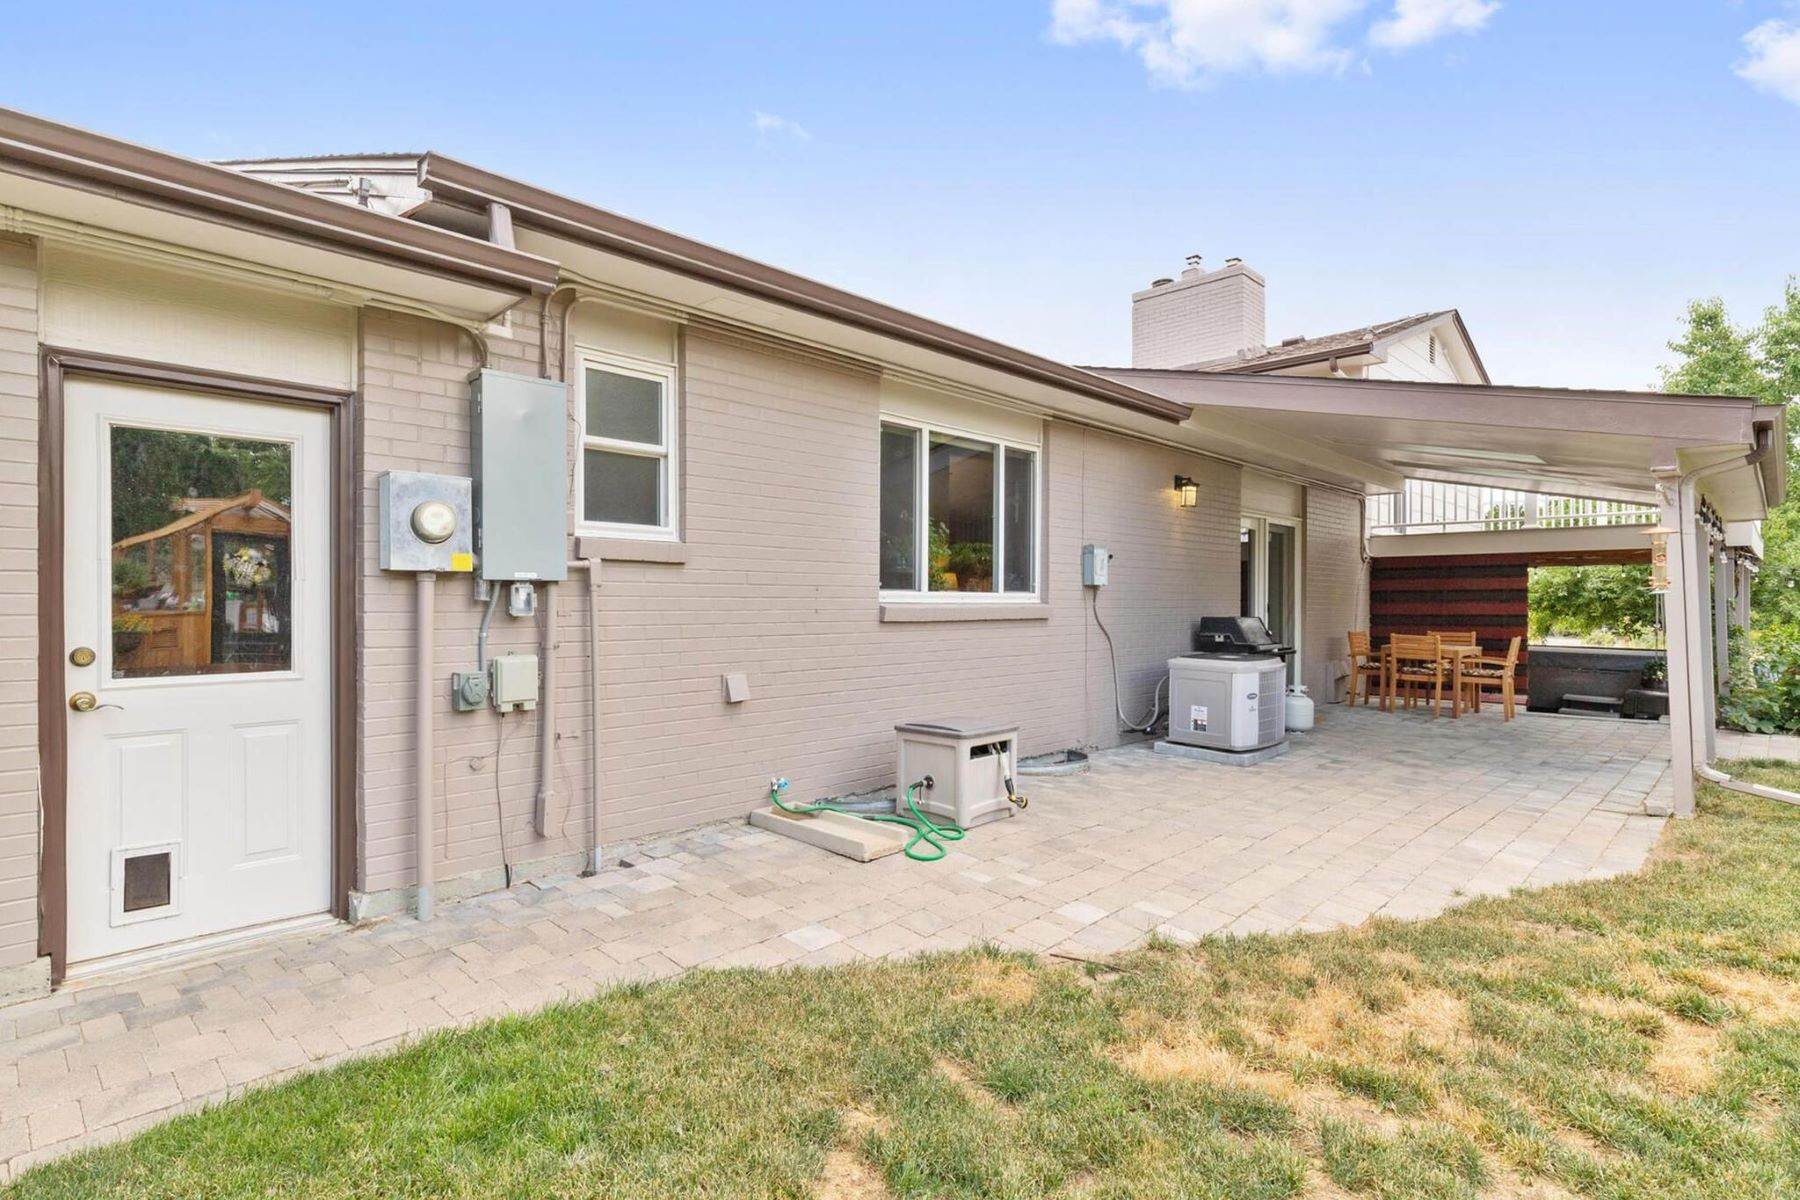 35. Single Family Homes for Active at Gorgeous Updated Home Offers Privacy in One of Arvada's Top Acreage Communities! 7295 Salvia Court Arvada, Colorado 80007 United States